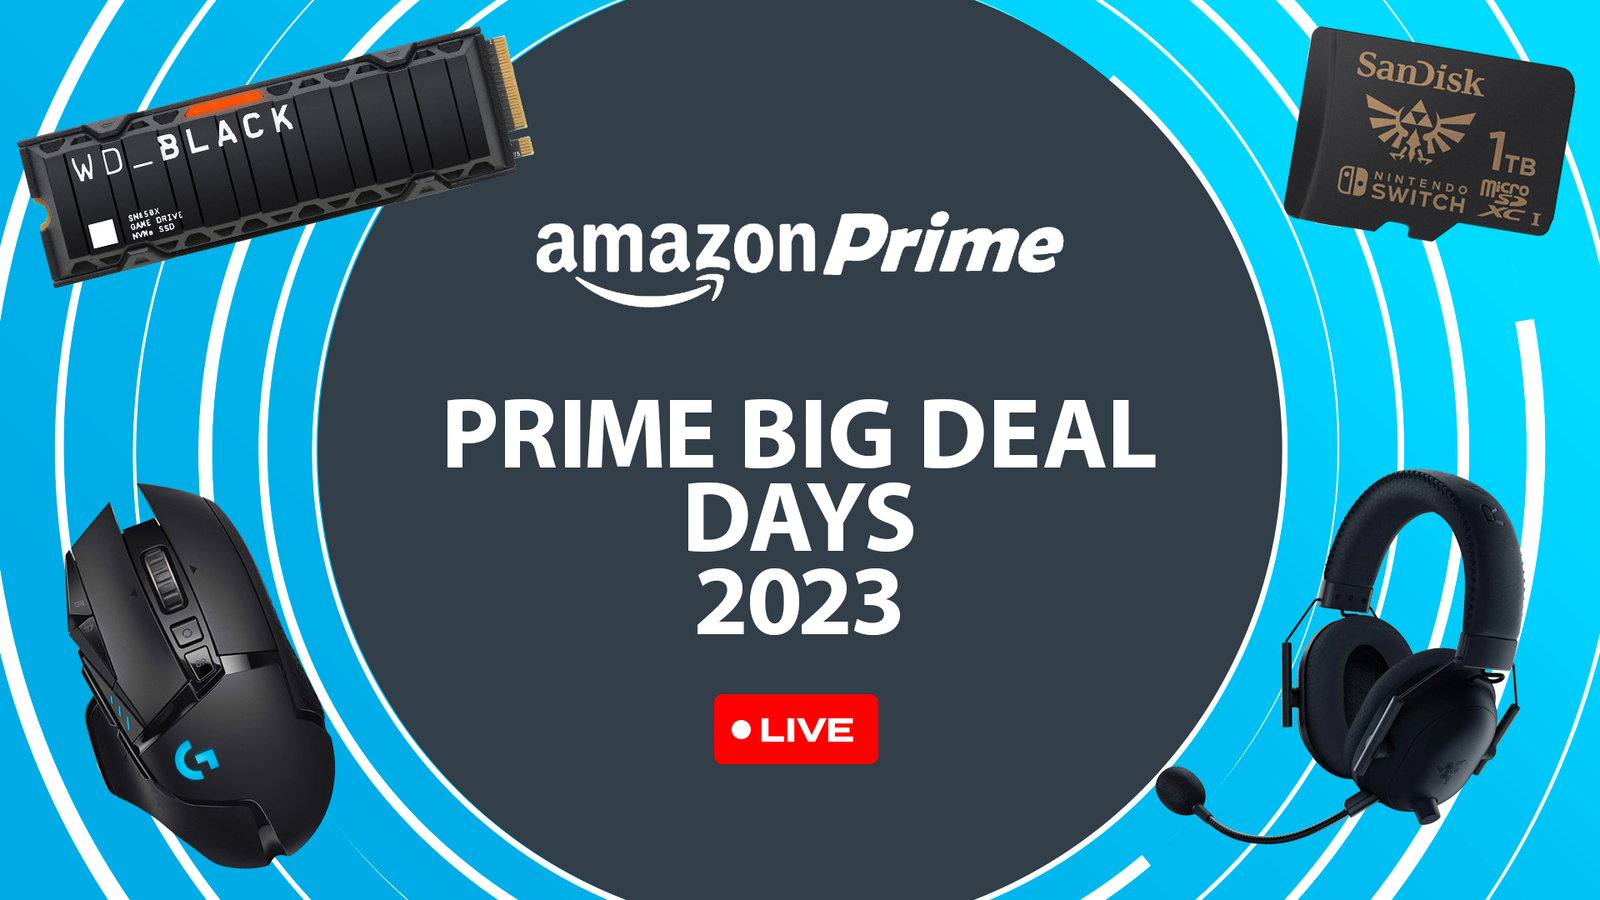 https://assetsio.reedpopcdn.com/Prime-Big-Deal-Days-2023-best-gaming-deals.png?width=1600&height=900&fit=crop&quality=100&format=png&enable=upscale&auto=webp